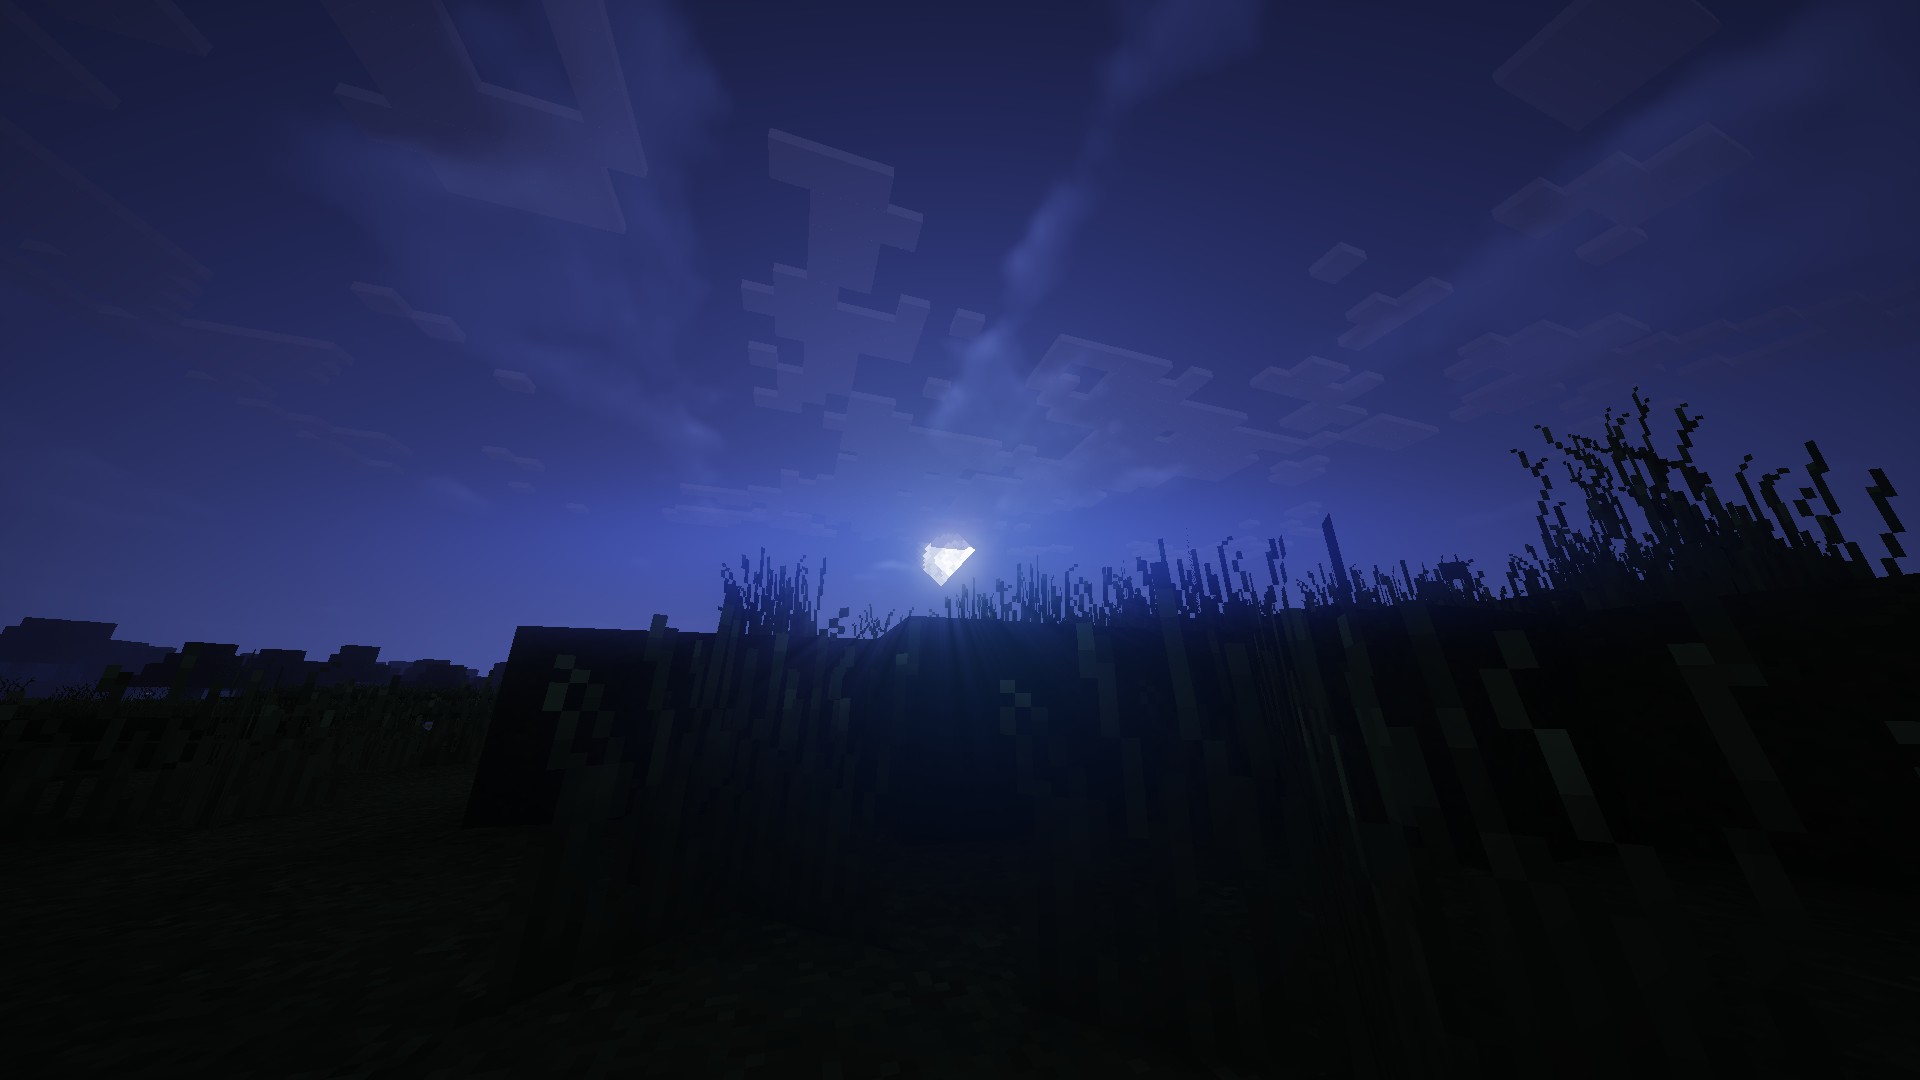 Minecraft shaders background ·① Download free full HD 